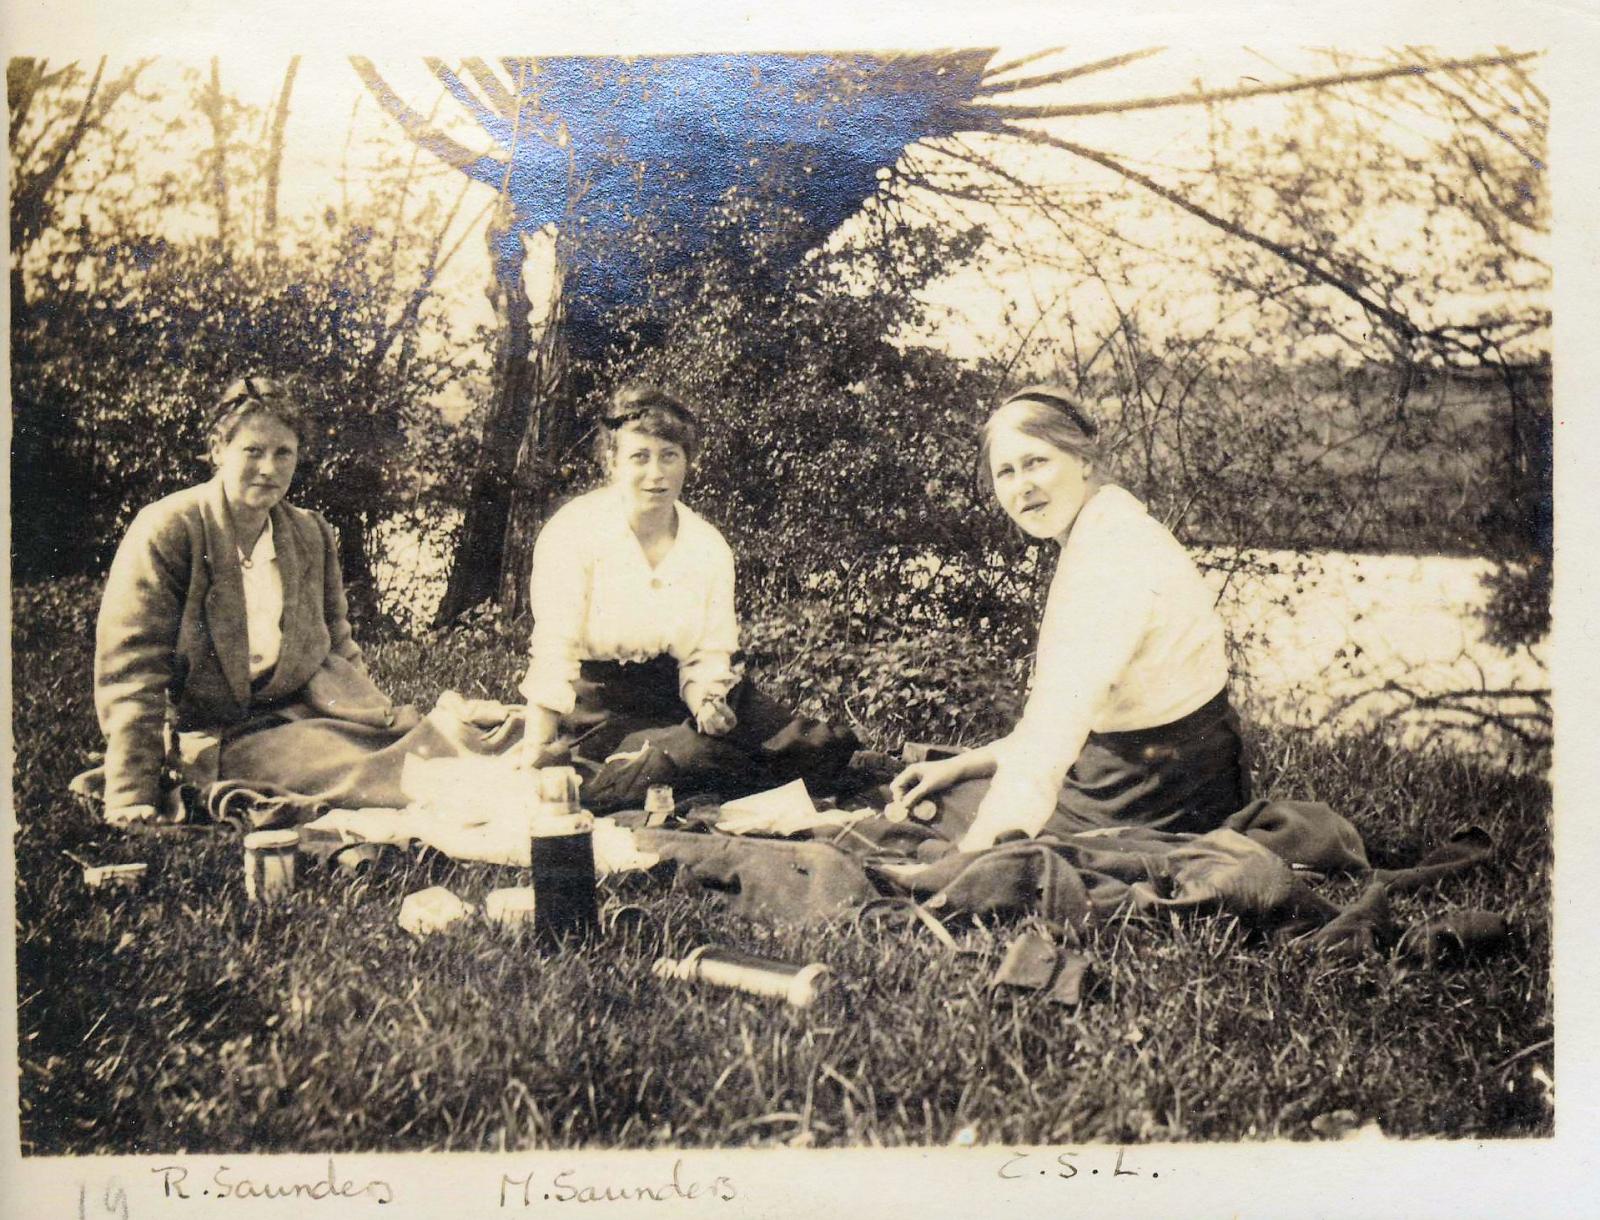 1918 photograph showing students enjoying a break in the river Cherwell